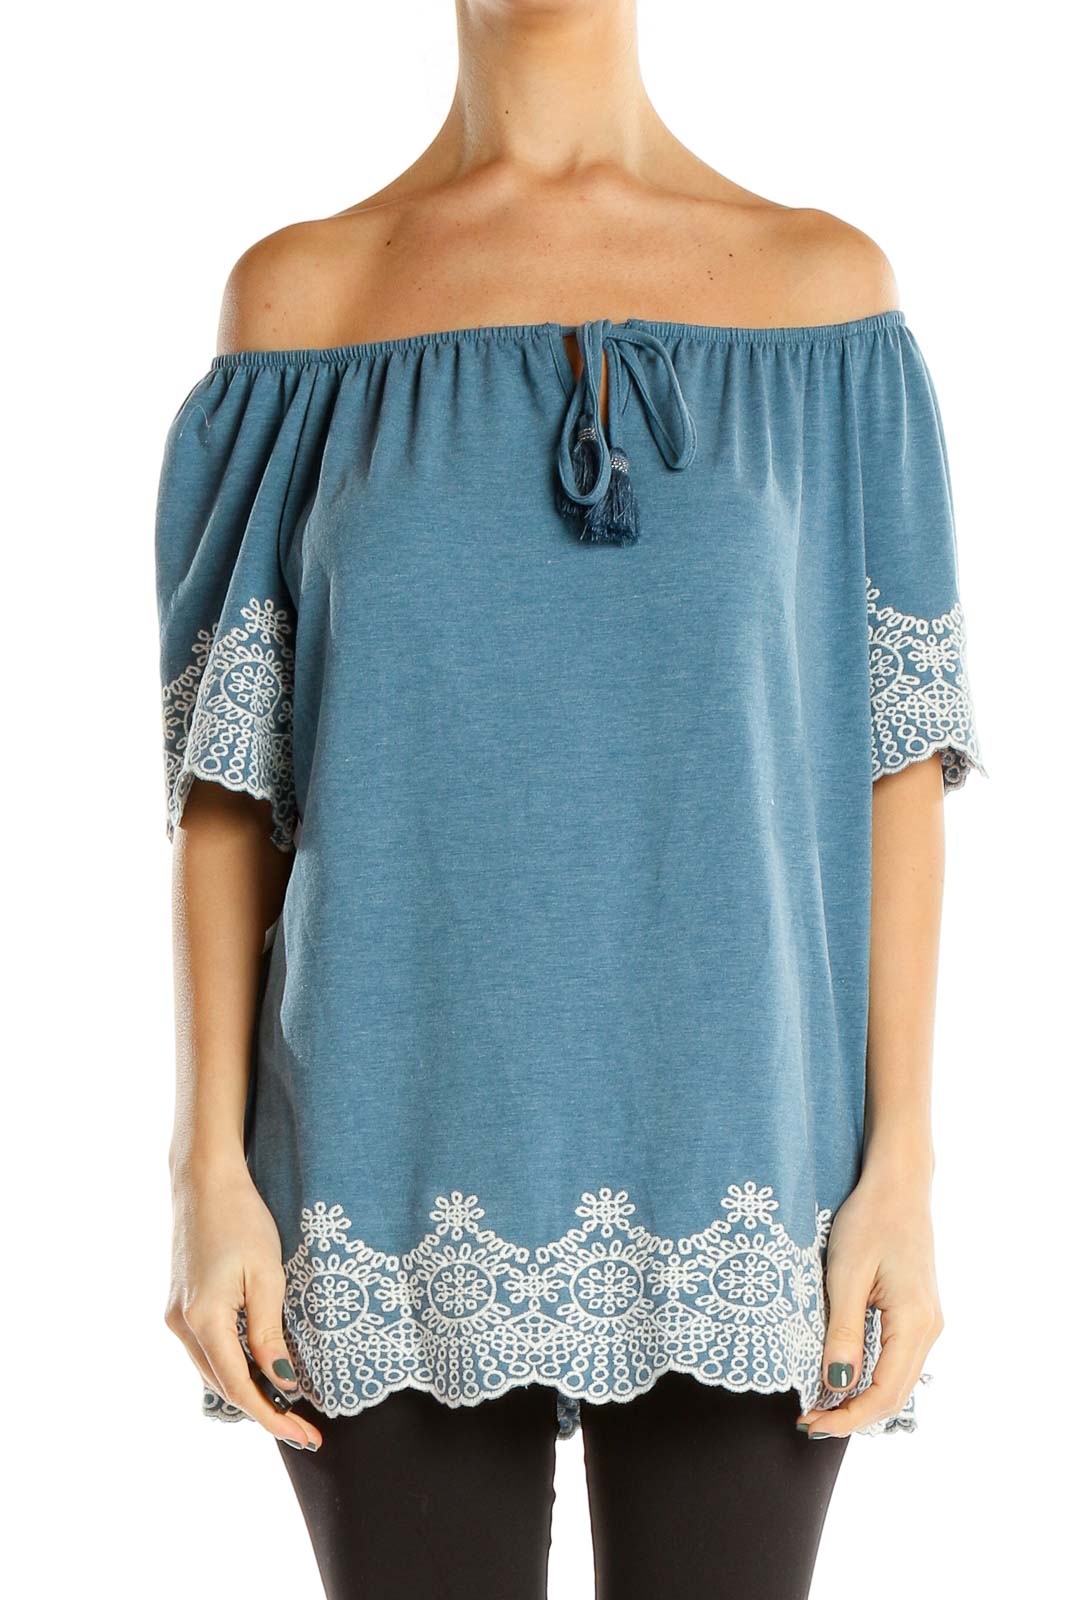 Blue Off The Shoulder Holiday Top With Embroidered Trim Front